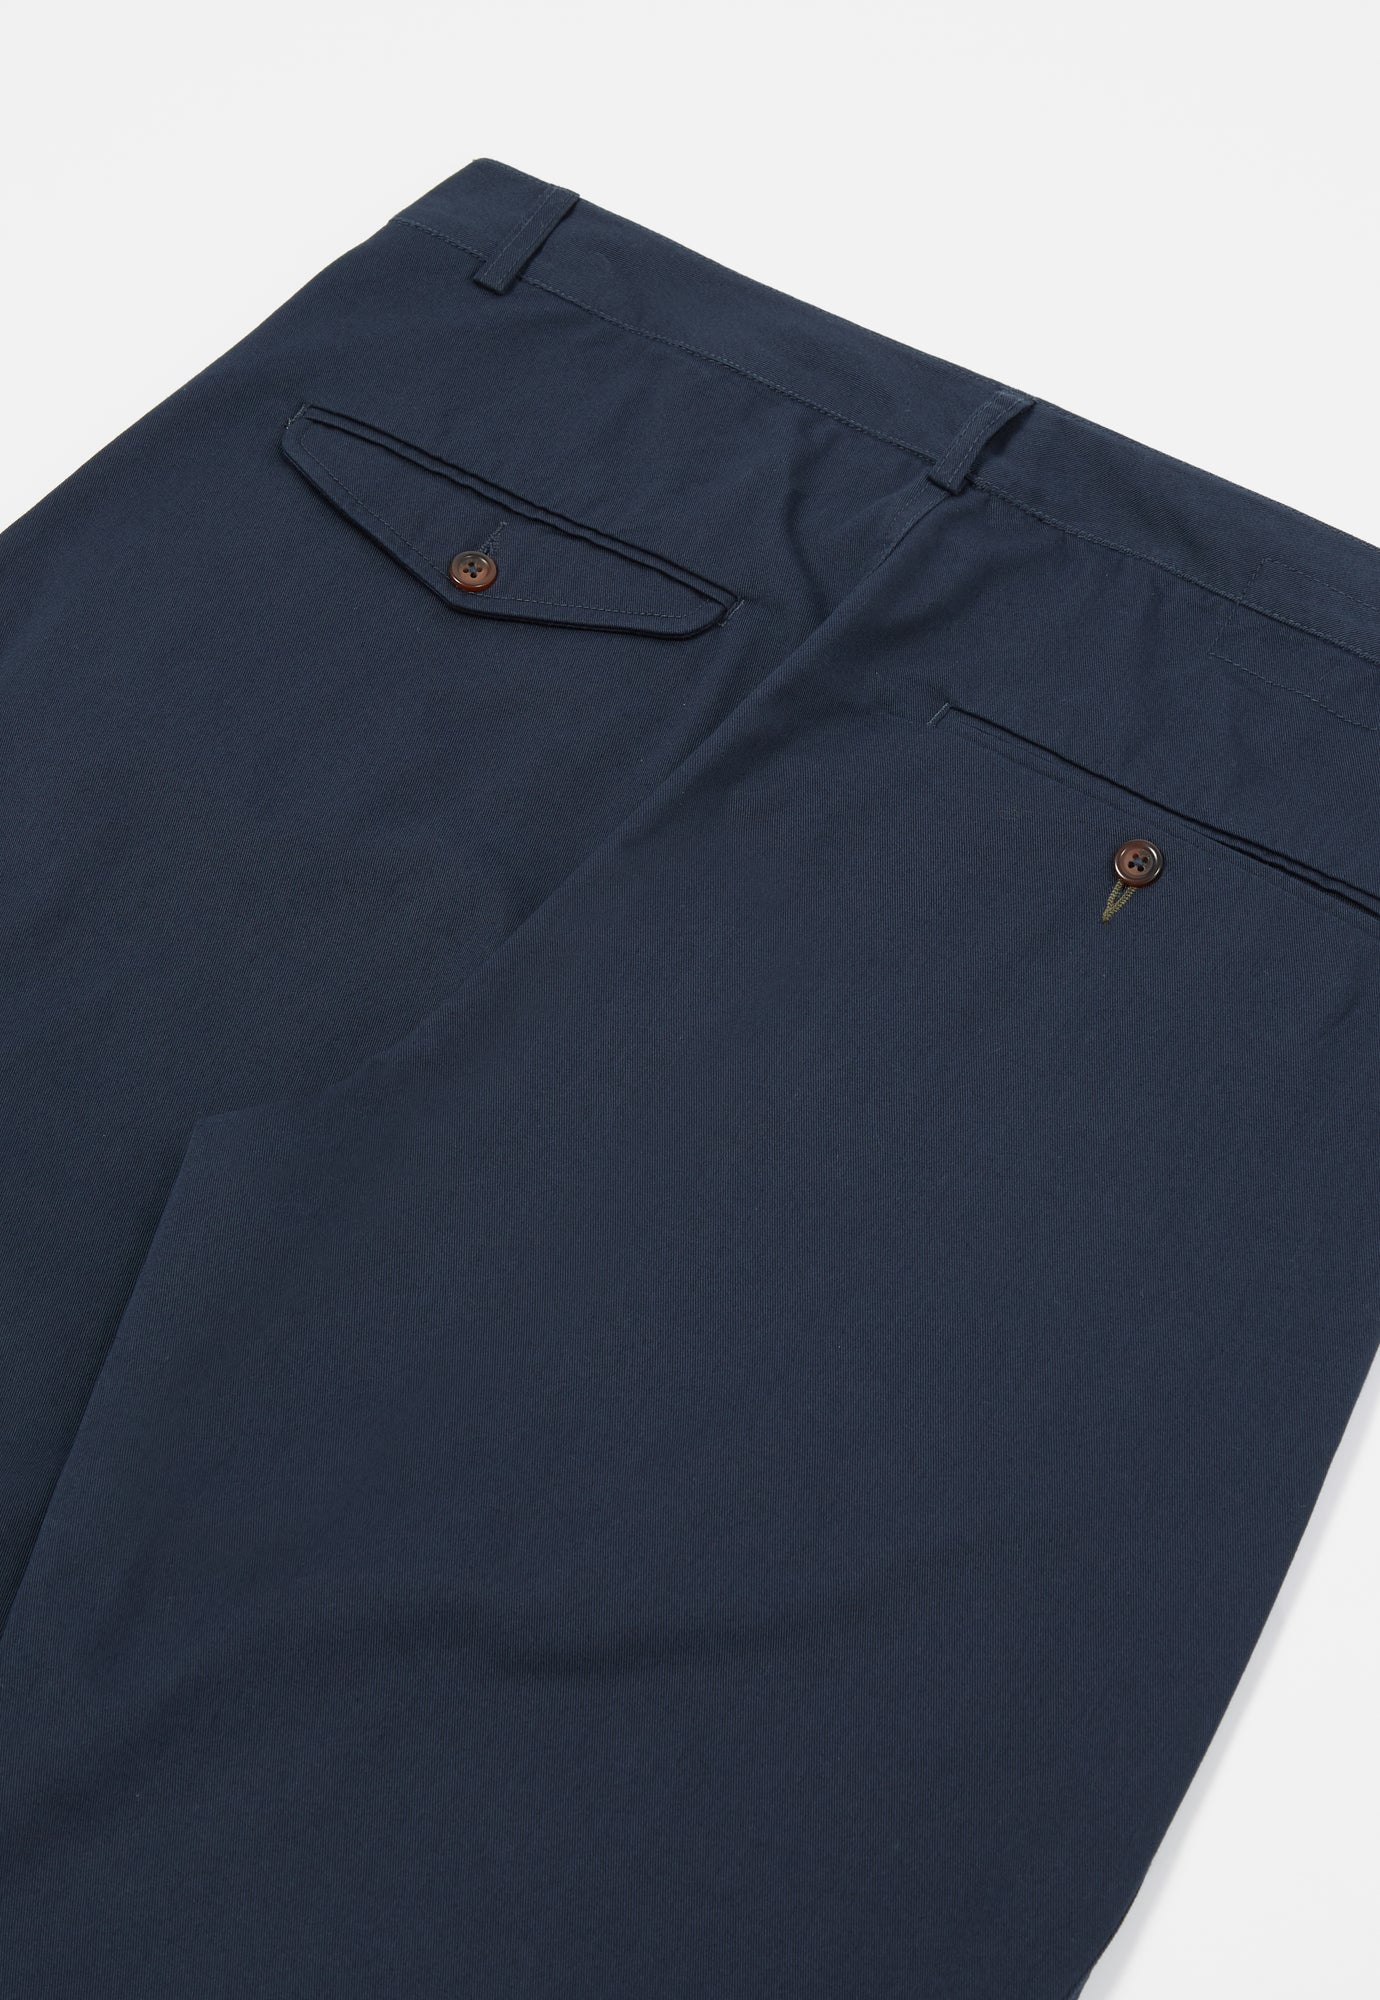 Universal Works Curved Pant in Navy Twill